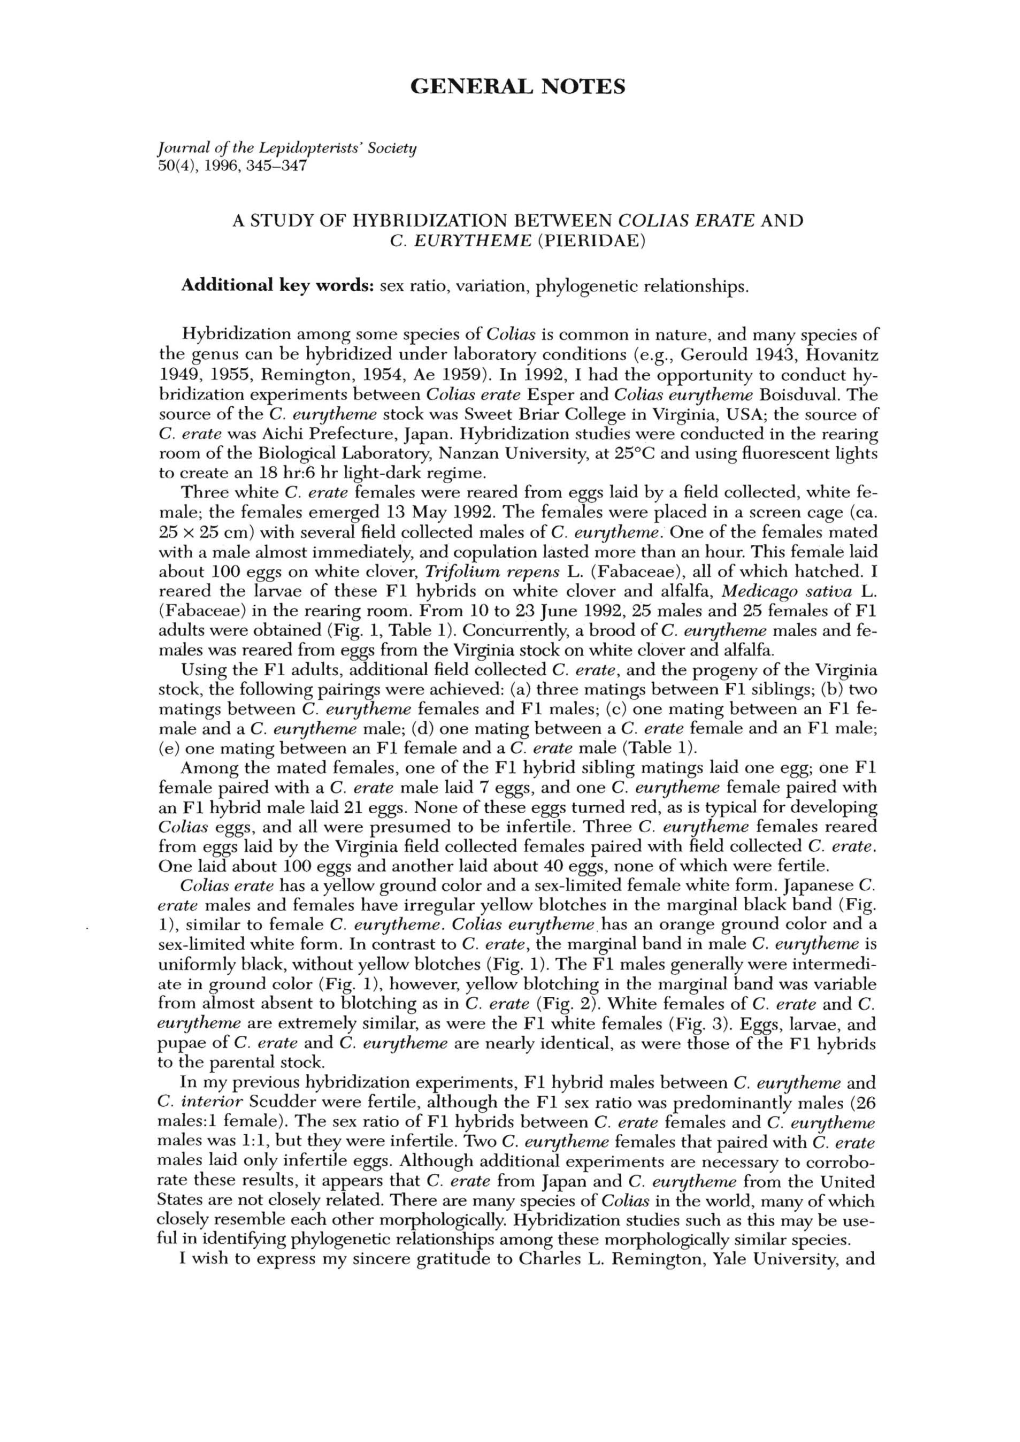 A Study of Hybridization Between Colias Erate and C